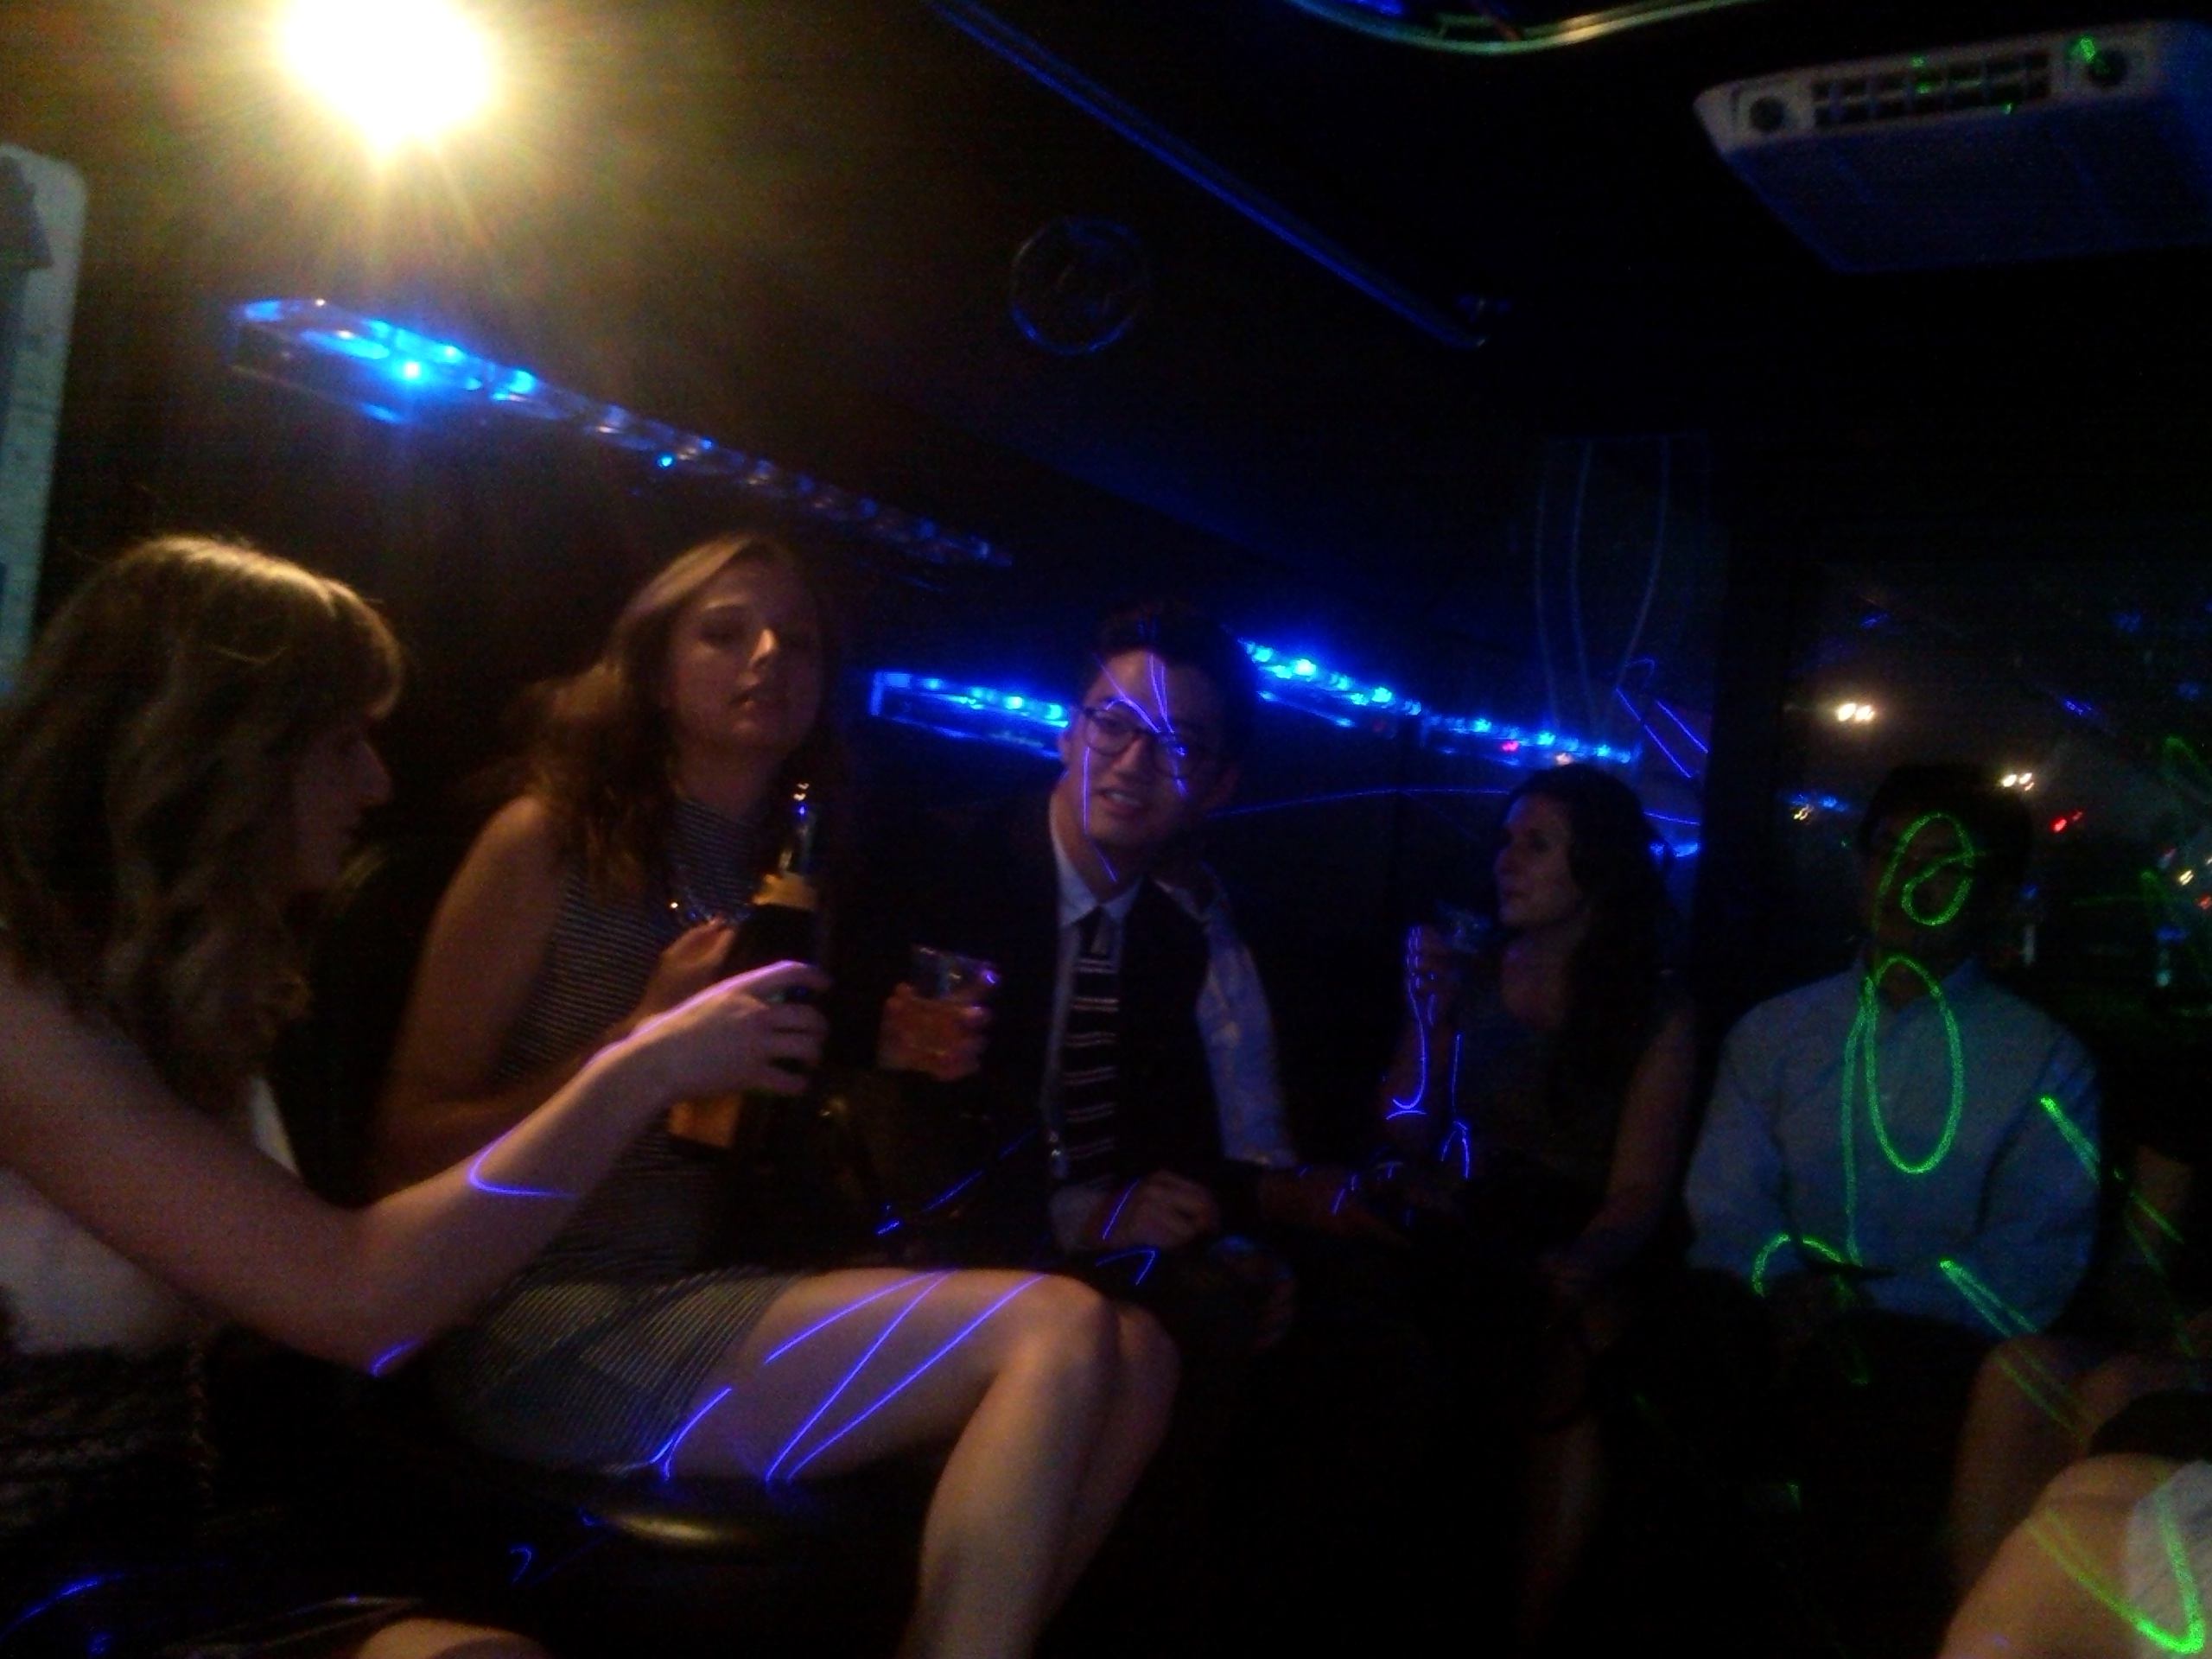 On the party bus - Jeff covered in frickin' lasers